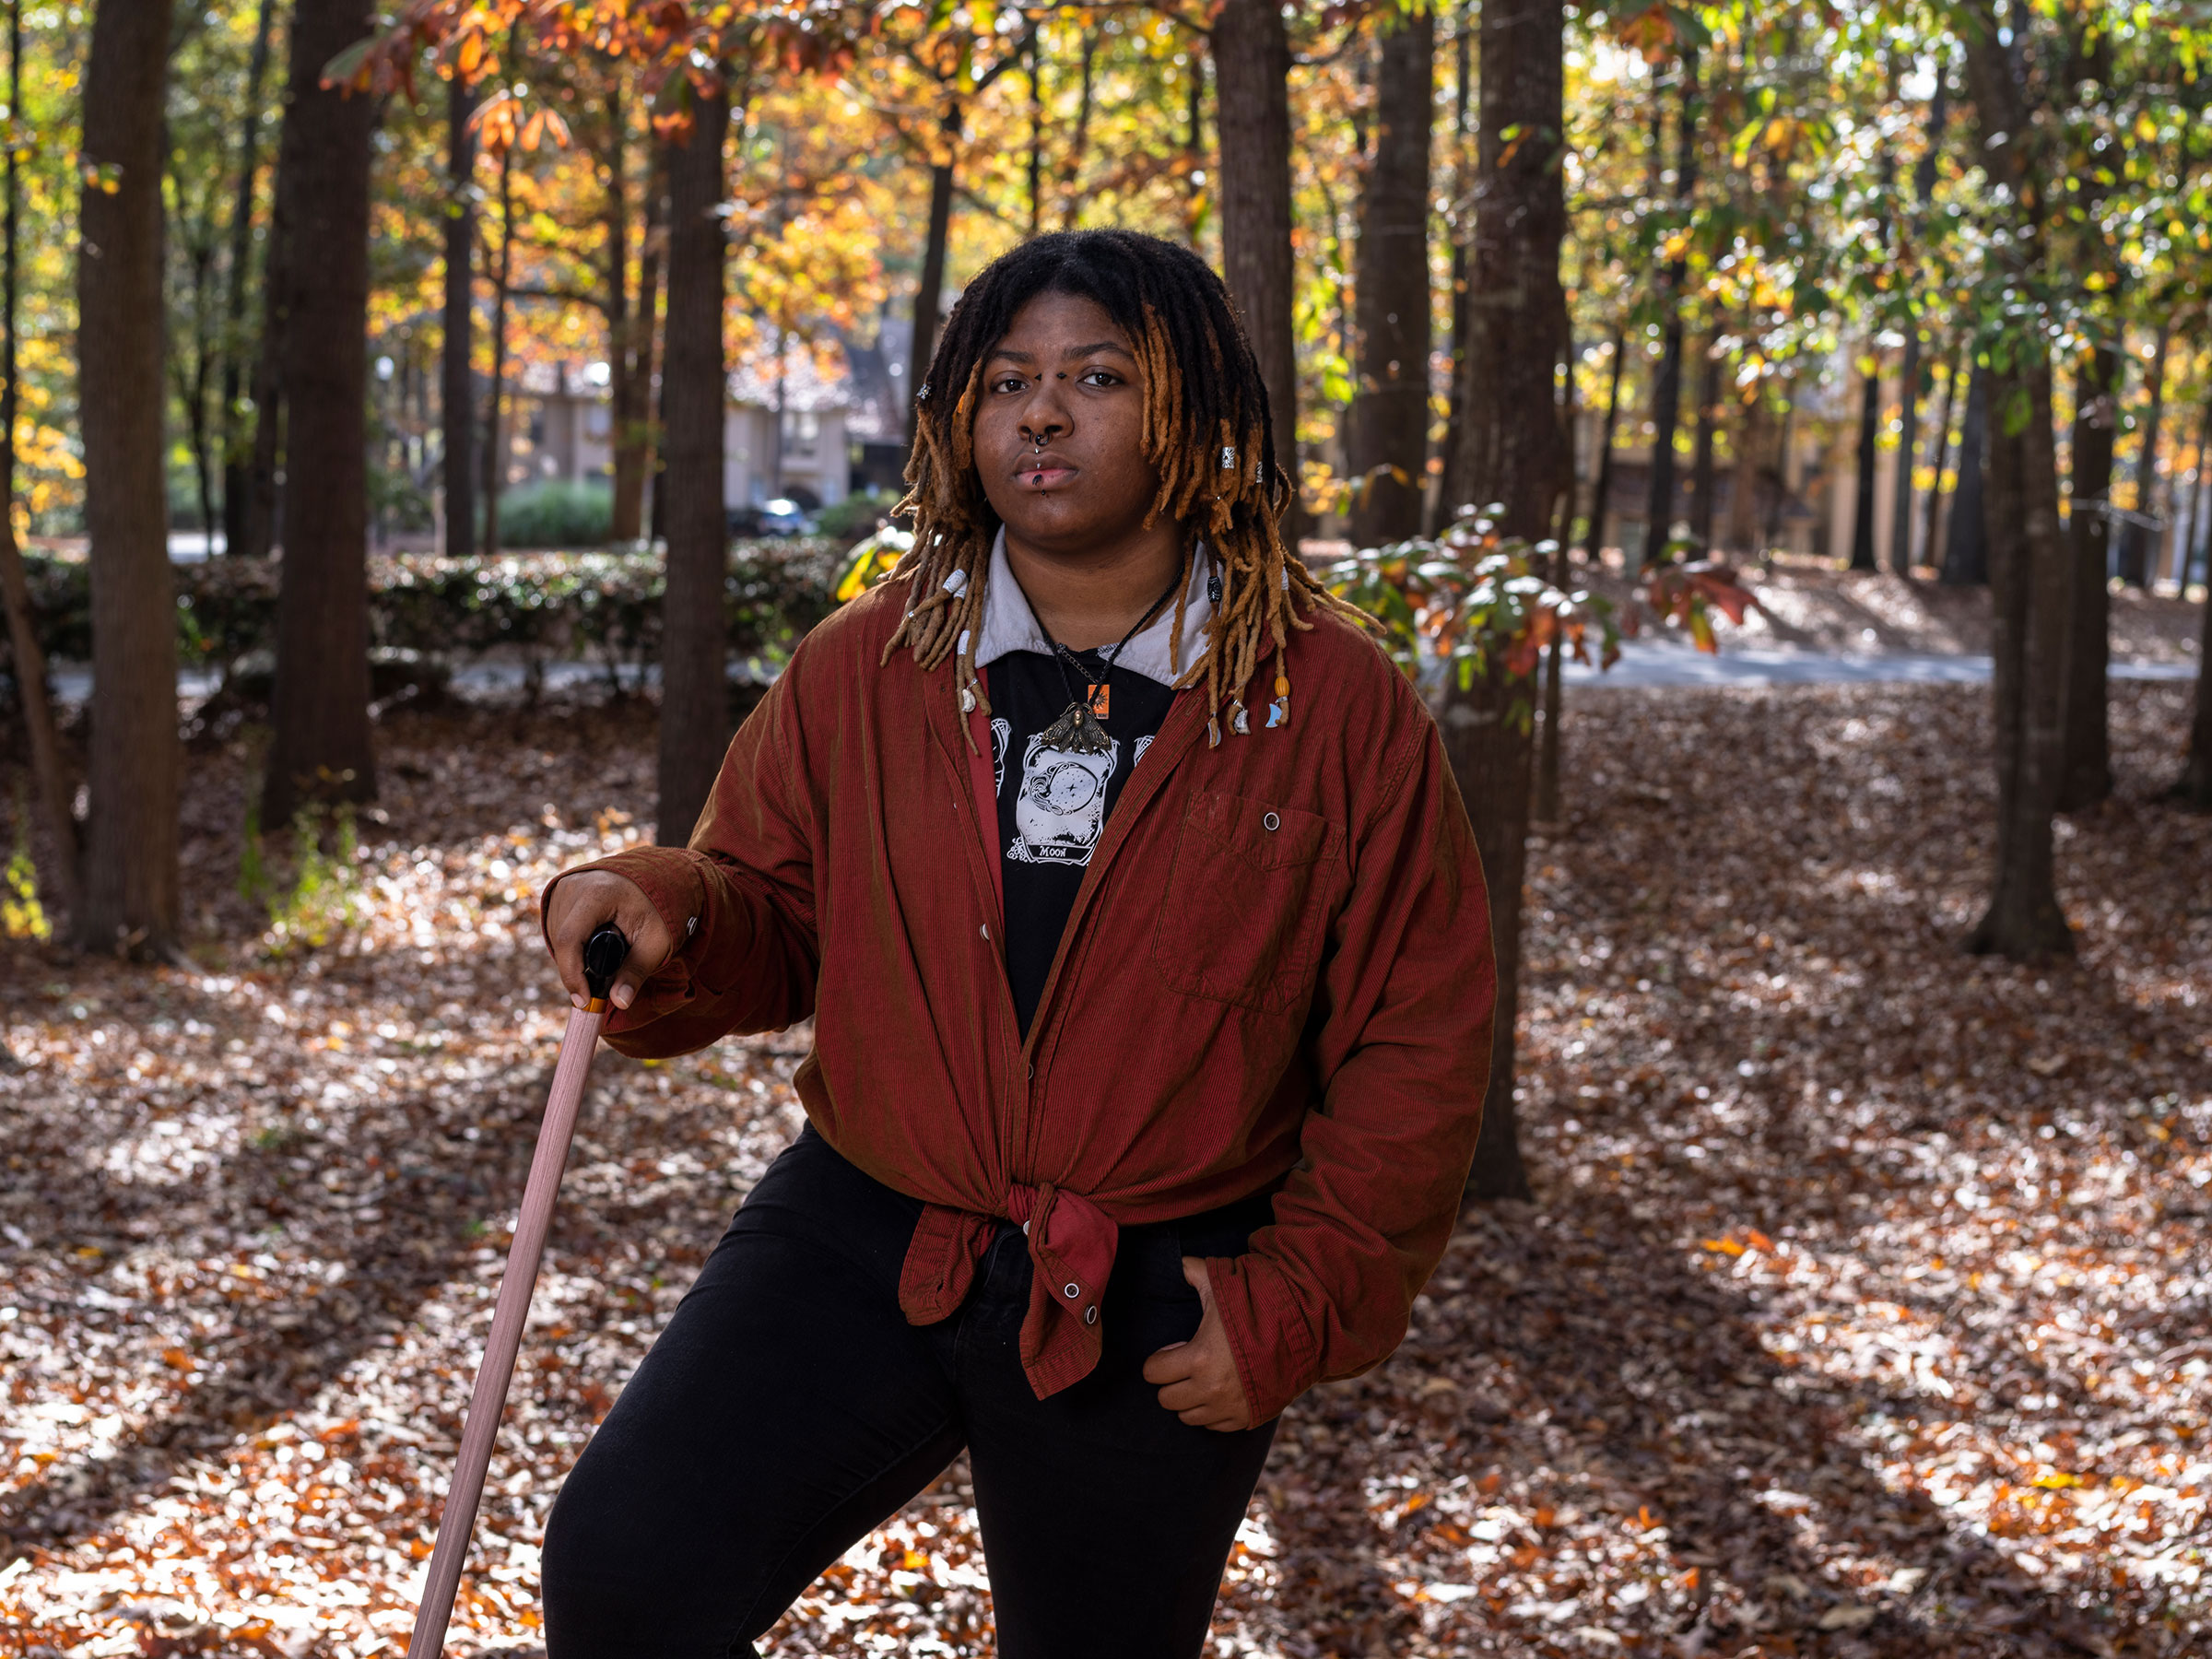 Marrow Woods poses for a portrait in Atlanta on Nov. 6. (Gillian Laub for TIME)